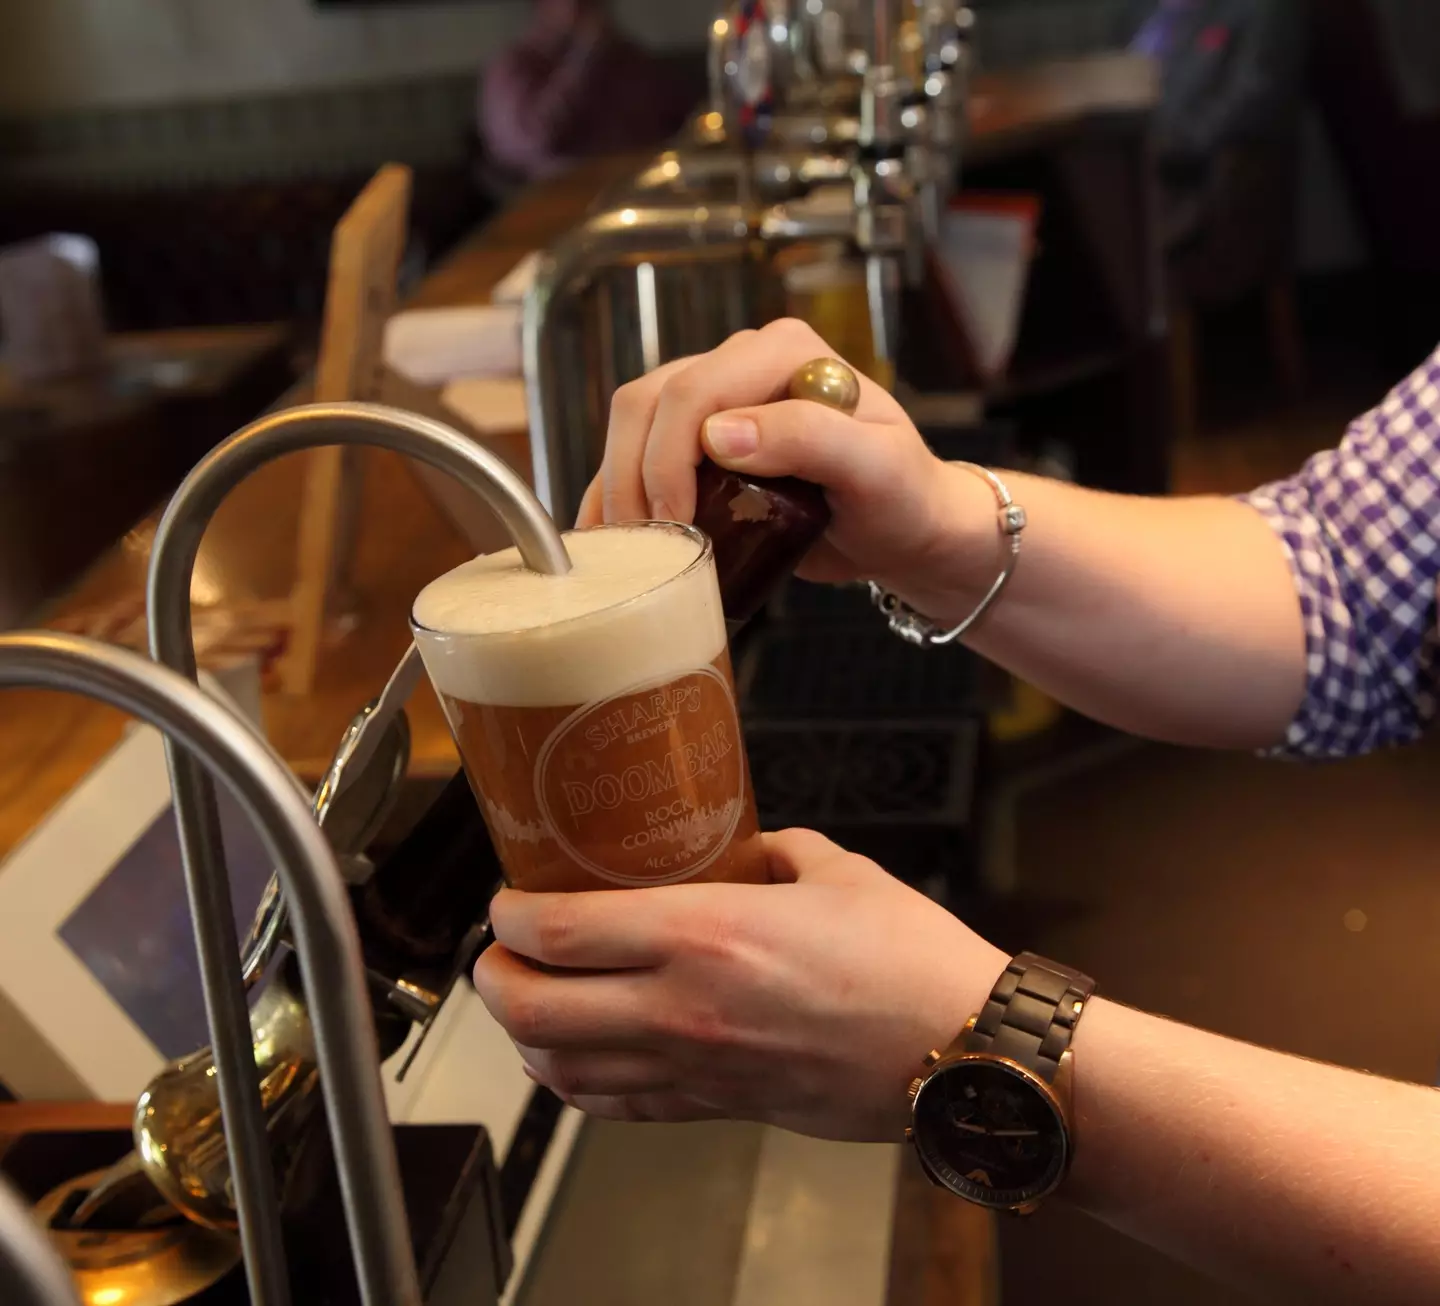 The Guidance Notes on the Dispense of Draught Beer by Free Flow and Hand Pull encourage customers to request a top-up if not fully satisfied with their pint.